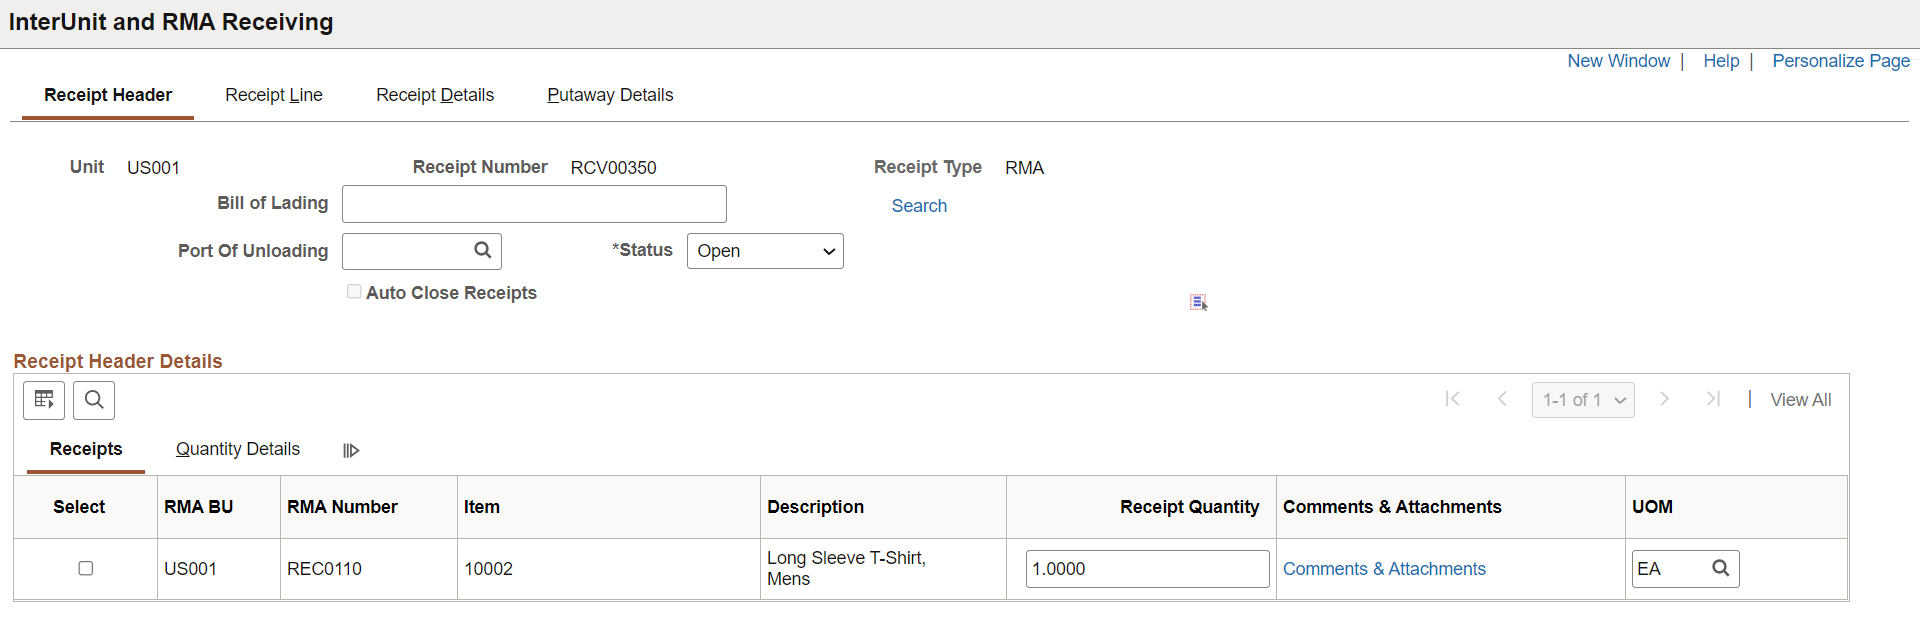 InterUnit and RMA Receiving - Receipt Header page